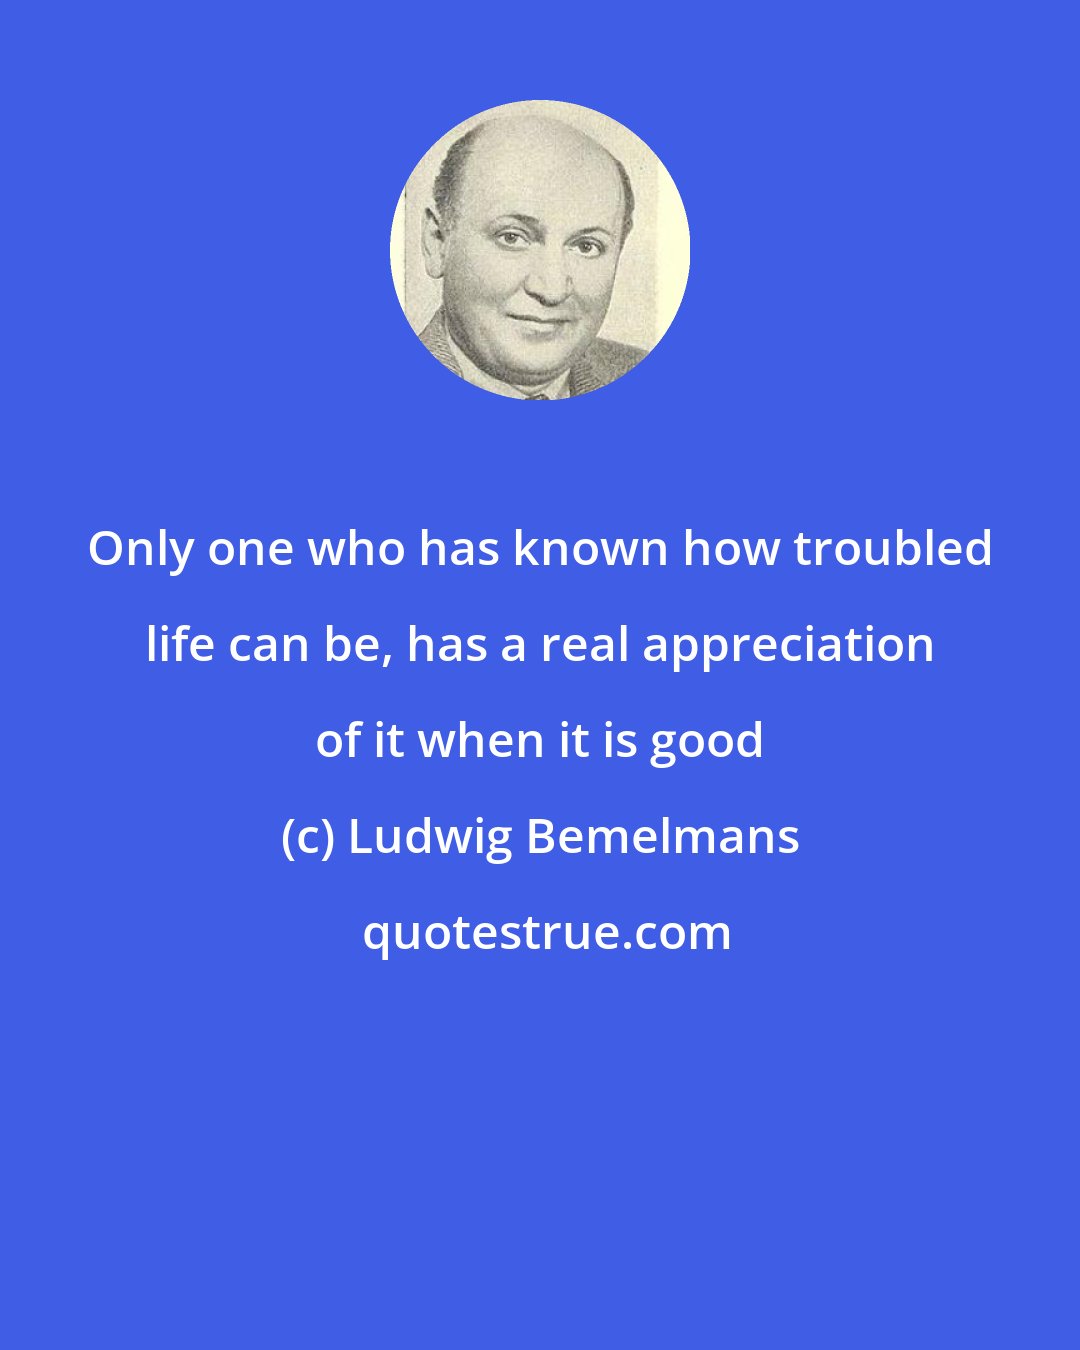 Ludwig Bemelmans: Only one who has known how troubled life can be, has a real appreciation of it when it is good